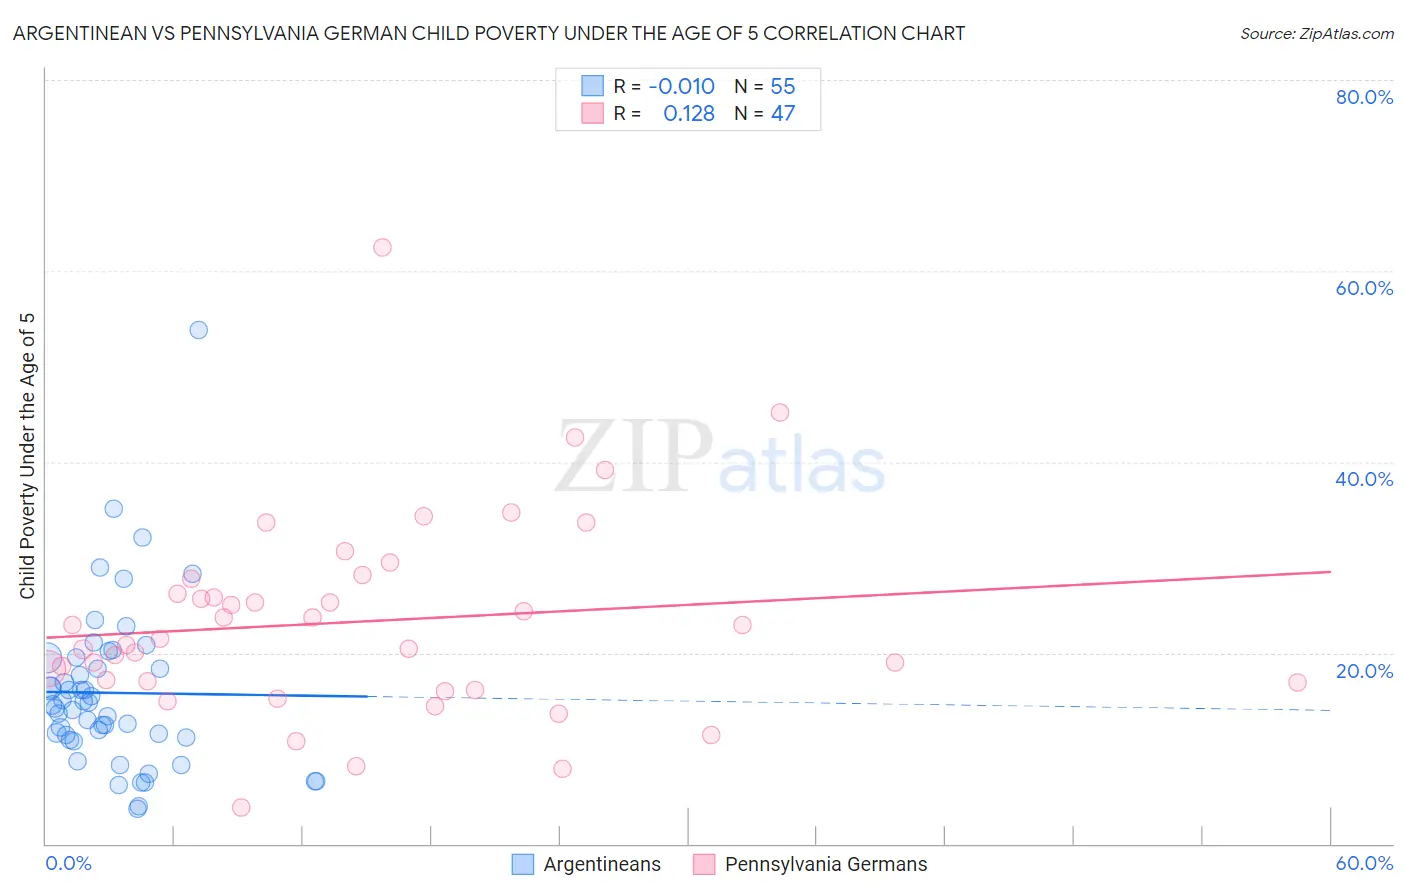 Argentinean vs Pennsylvania German Child Poverty Under the Age of 5